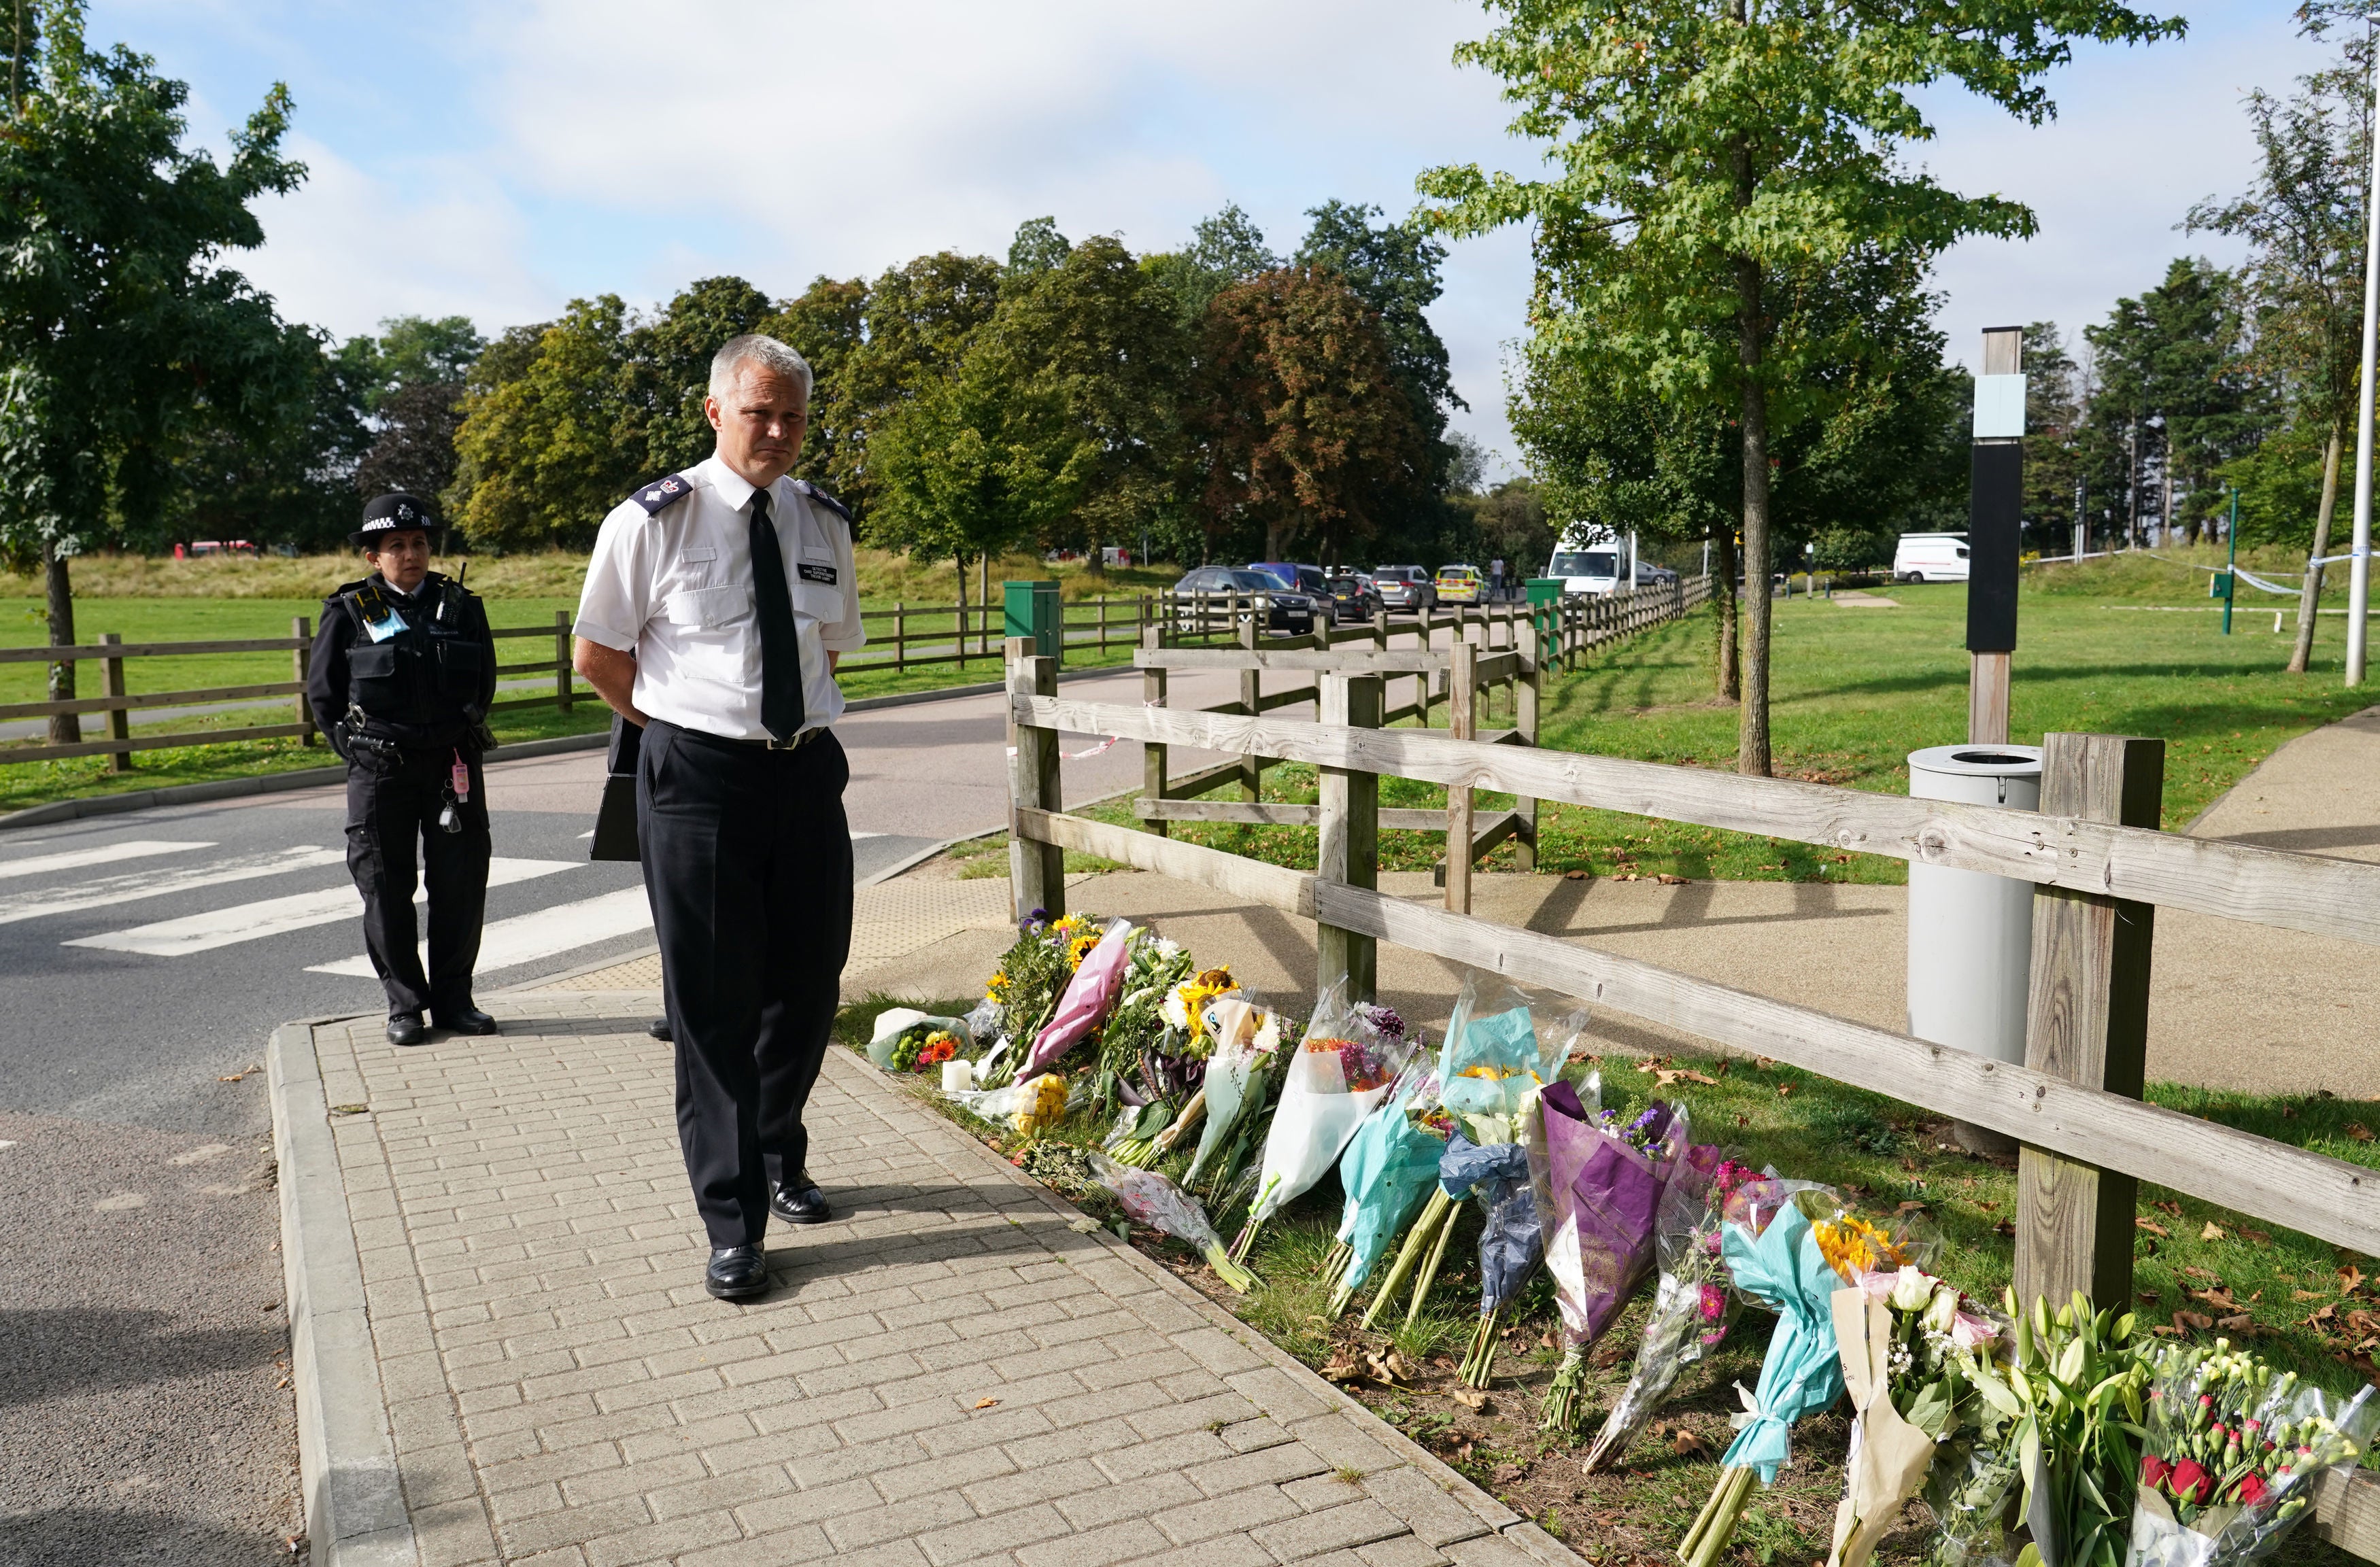 Chief Superintendent Trevor Lawry by the floral tributes near where the body of Sabina Nessa was found